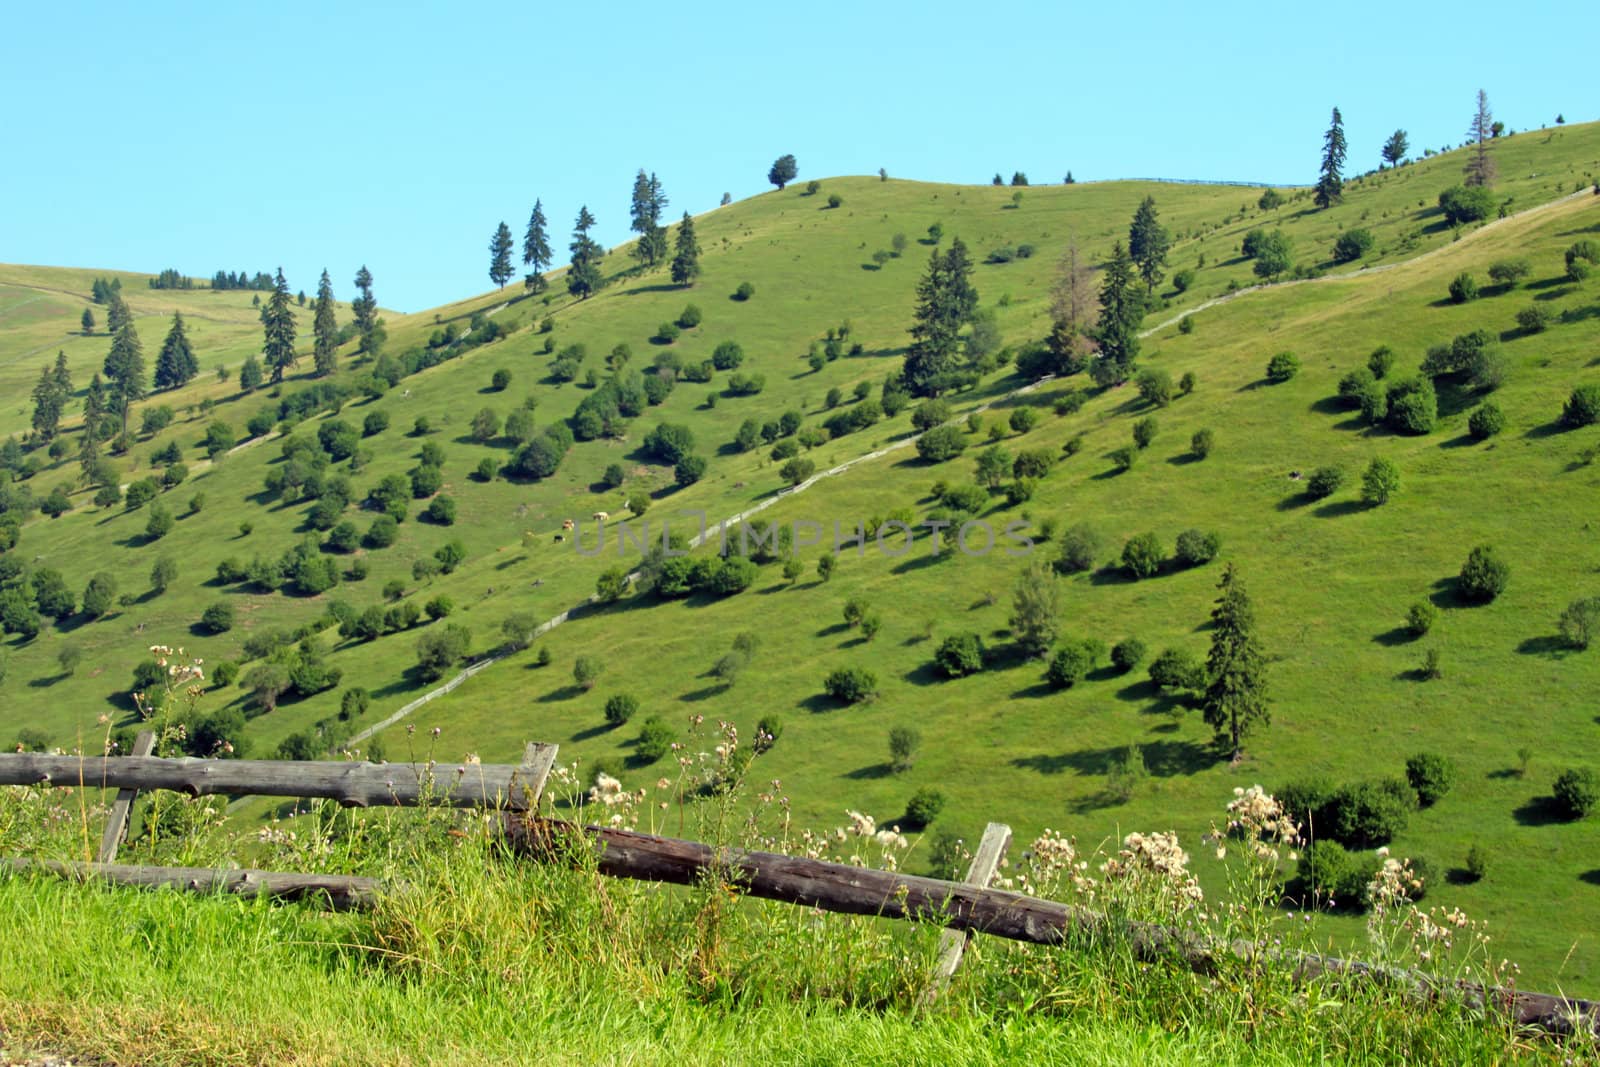 Green landscape on the hills, trees scattered around.